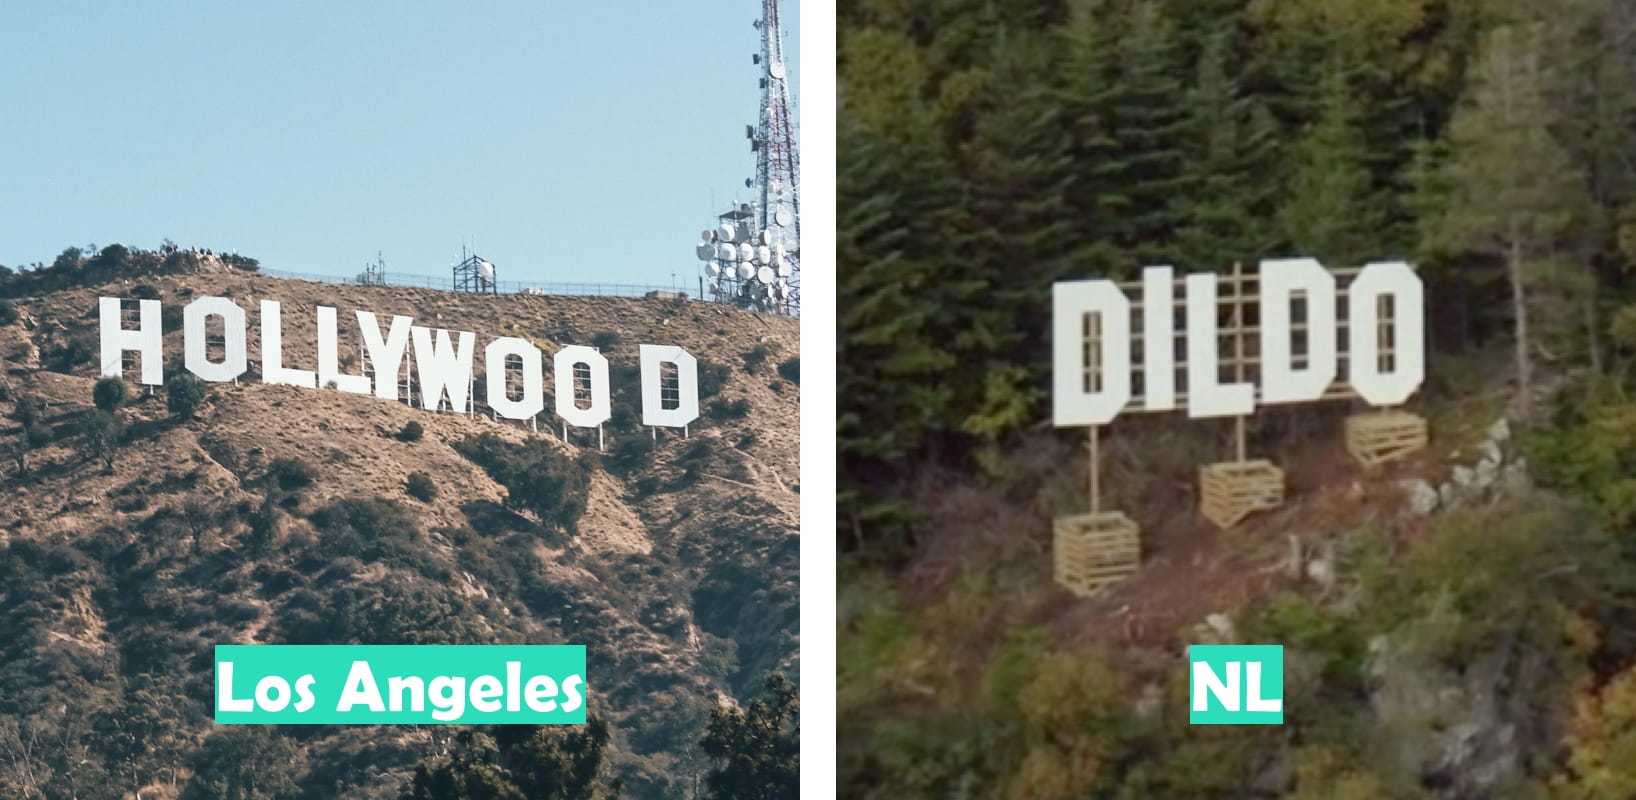 Los Angeles (Hollywood pictured) vs Newfoundland & Labrador (Dildo pictured)